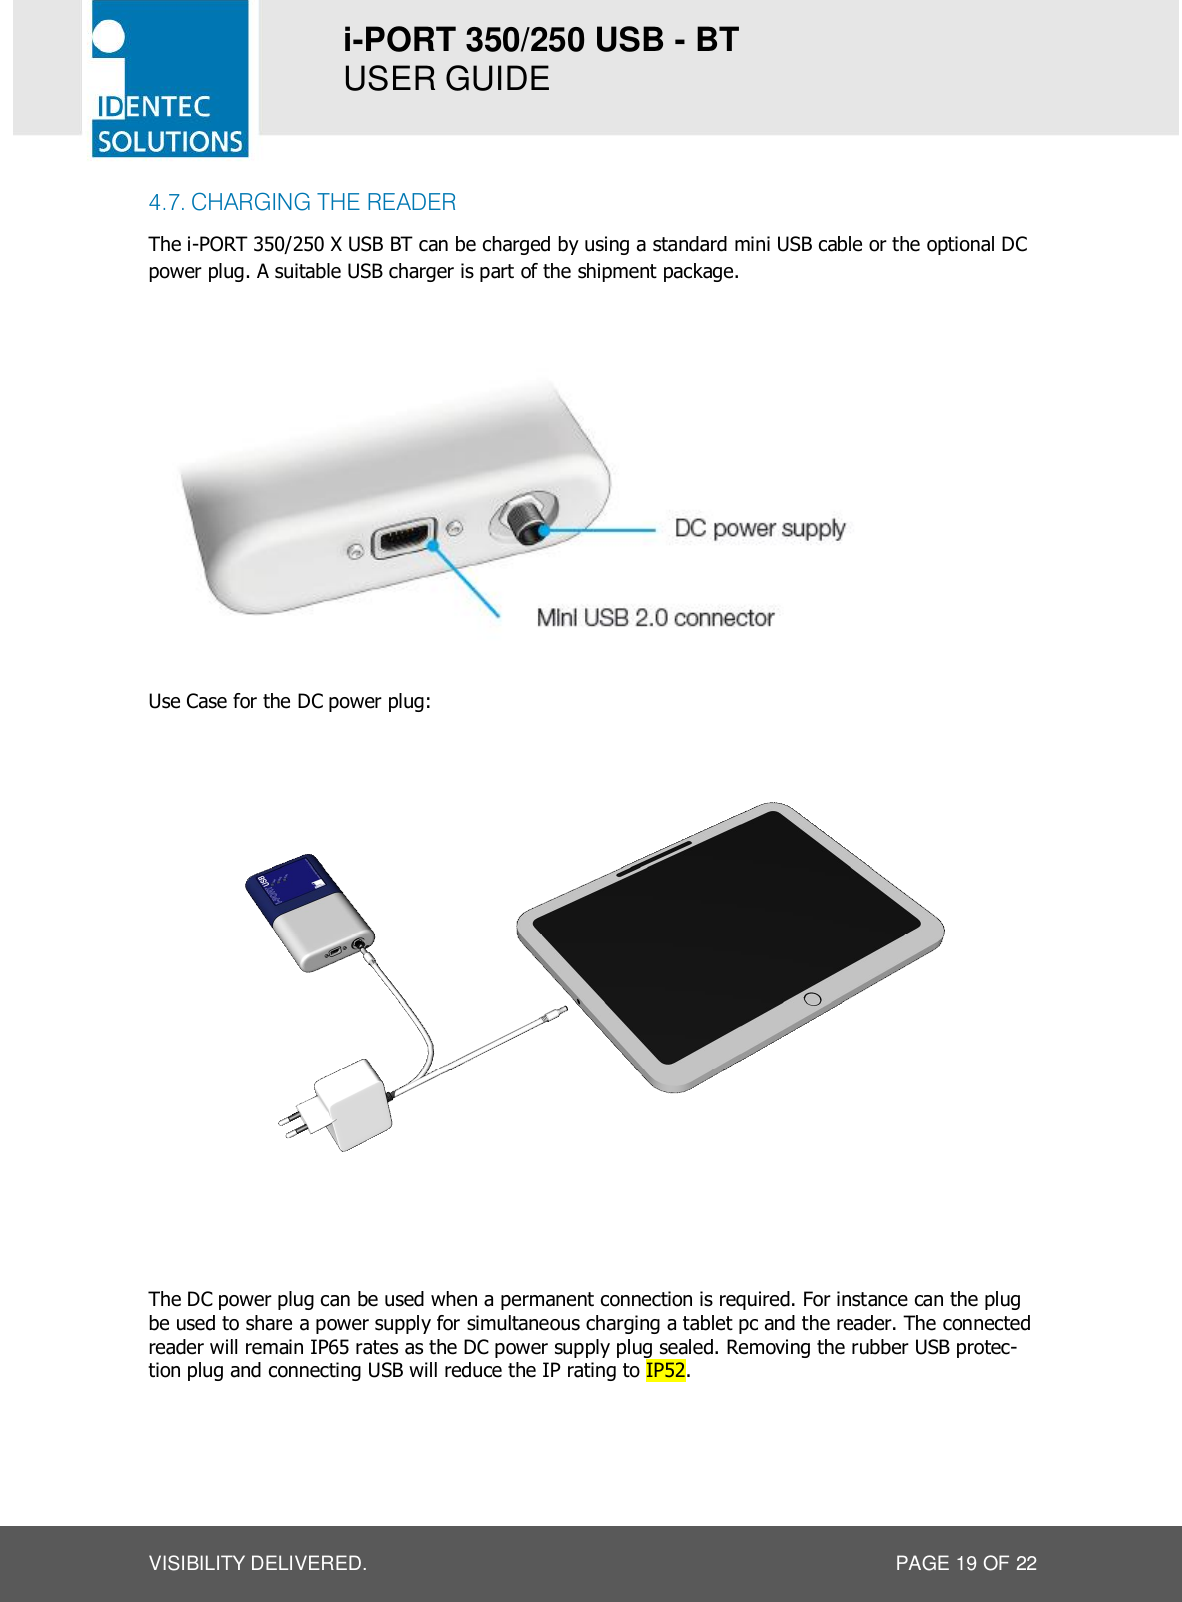 i-PORT 350/250 USB - BT  USER GUIDE  VISIBILITY DELIVERED.  PAGE 19 OF 22 4.7. CHARGING THE READER The i-PORT 350/250 X USB BT can be charged by using a standard mini USB cable or the optional DC power plug. A suitable USB charger is part of the shipment package.    Use Case for the DC power plug:   The DC power plug can be used when a permanent connection is required. For instance can the plug be used to share a power supply for simultaneous charging a tablet pc and the reader. The connected reader will remain IP65 rates as the DC power supply plug sealed. Removing the rubber USB protec-tion plug and connecting USB will reduce the IP rating to IP52.    